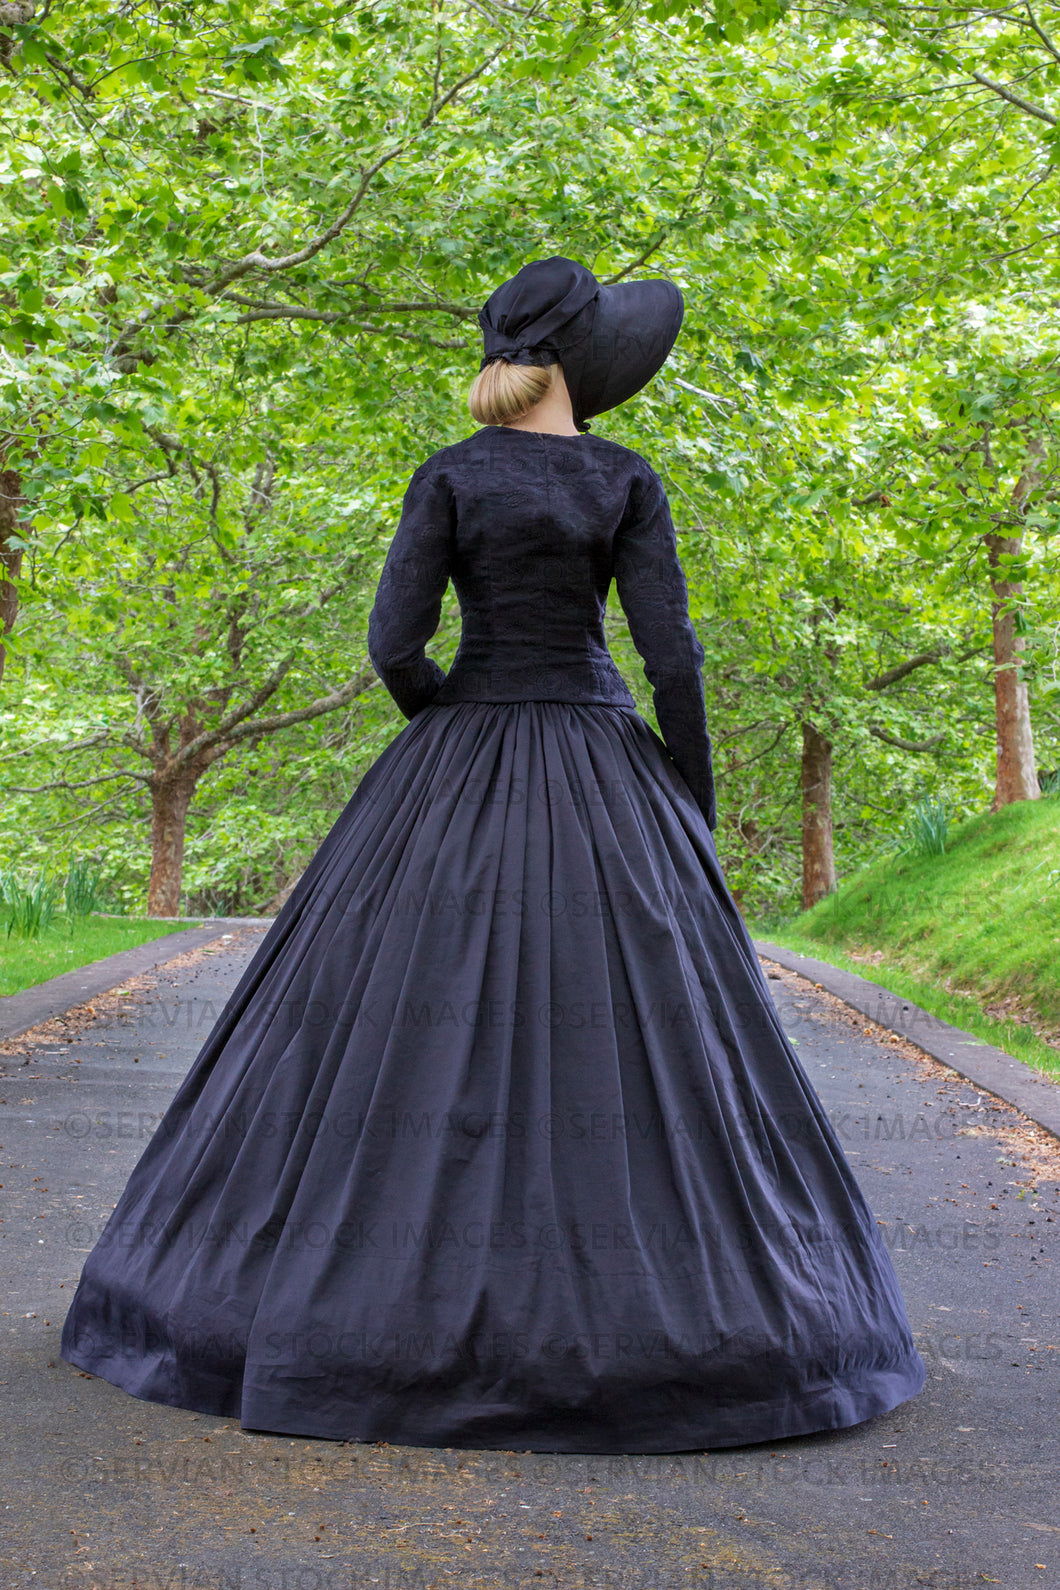 Victorian woman in a black ensemble outdoors under a grove of trees   (Ashley 0190)